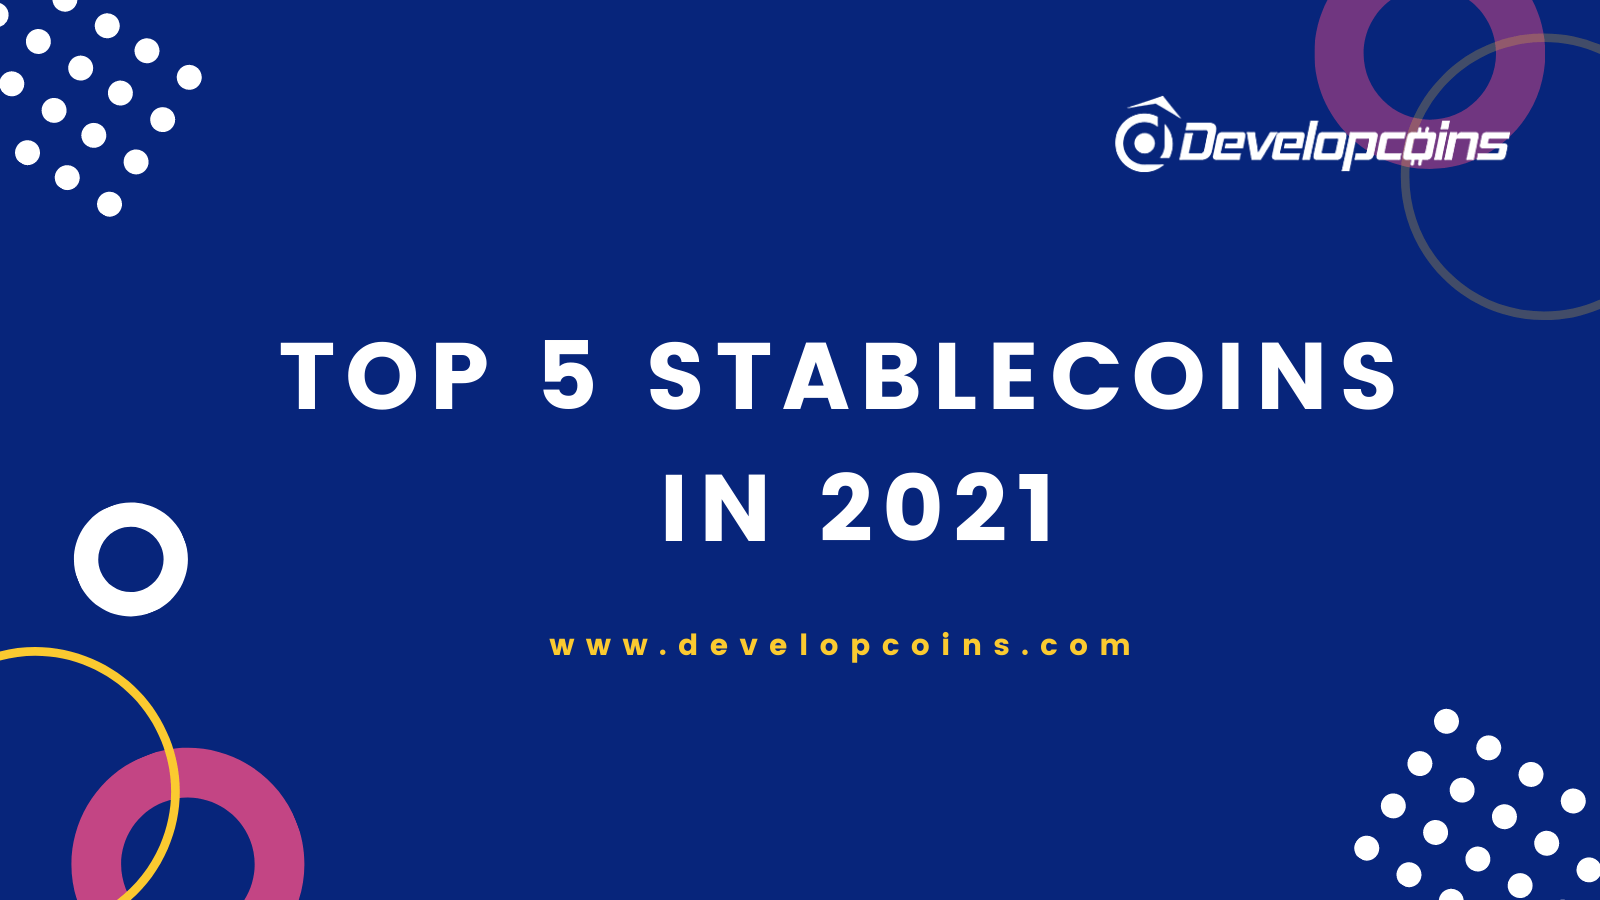 Brief Explanation of Top 5 Stablecoin Usage in Cryptocurrency Industry